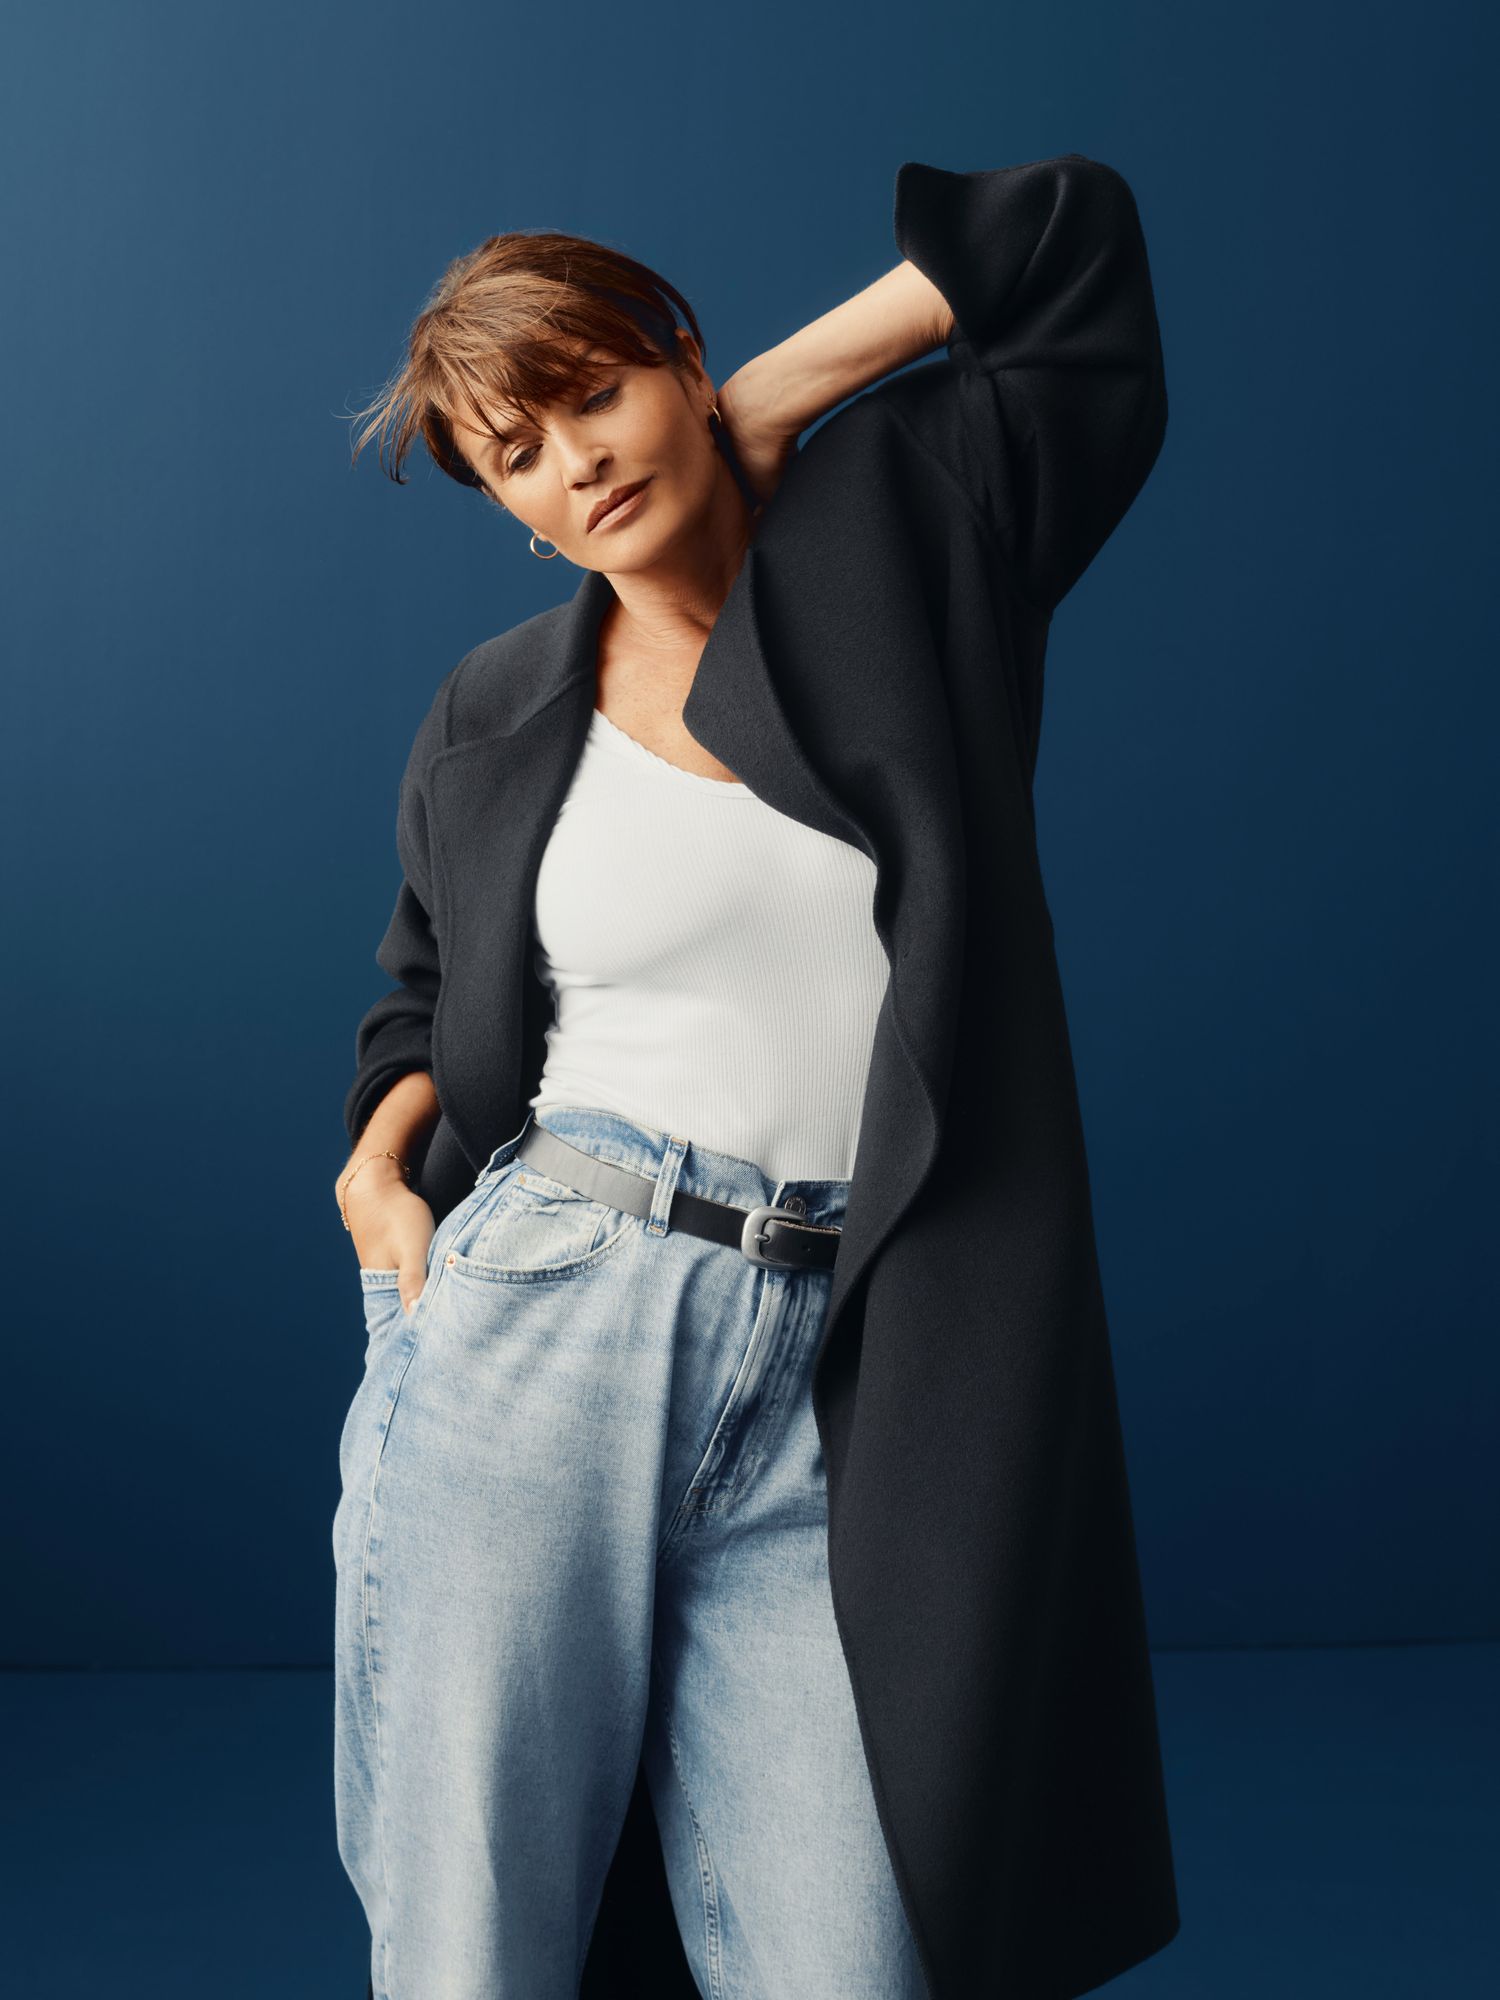 Helena Christensen in the Icon Trench Coat for the Gap fall collection 2023